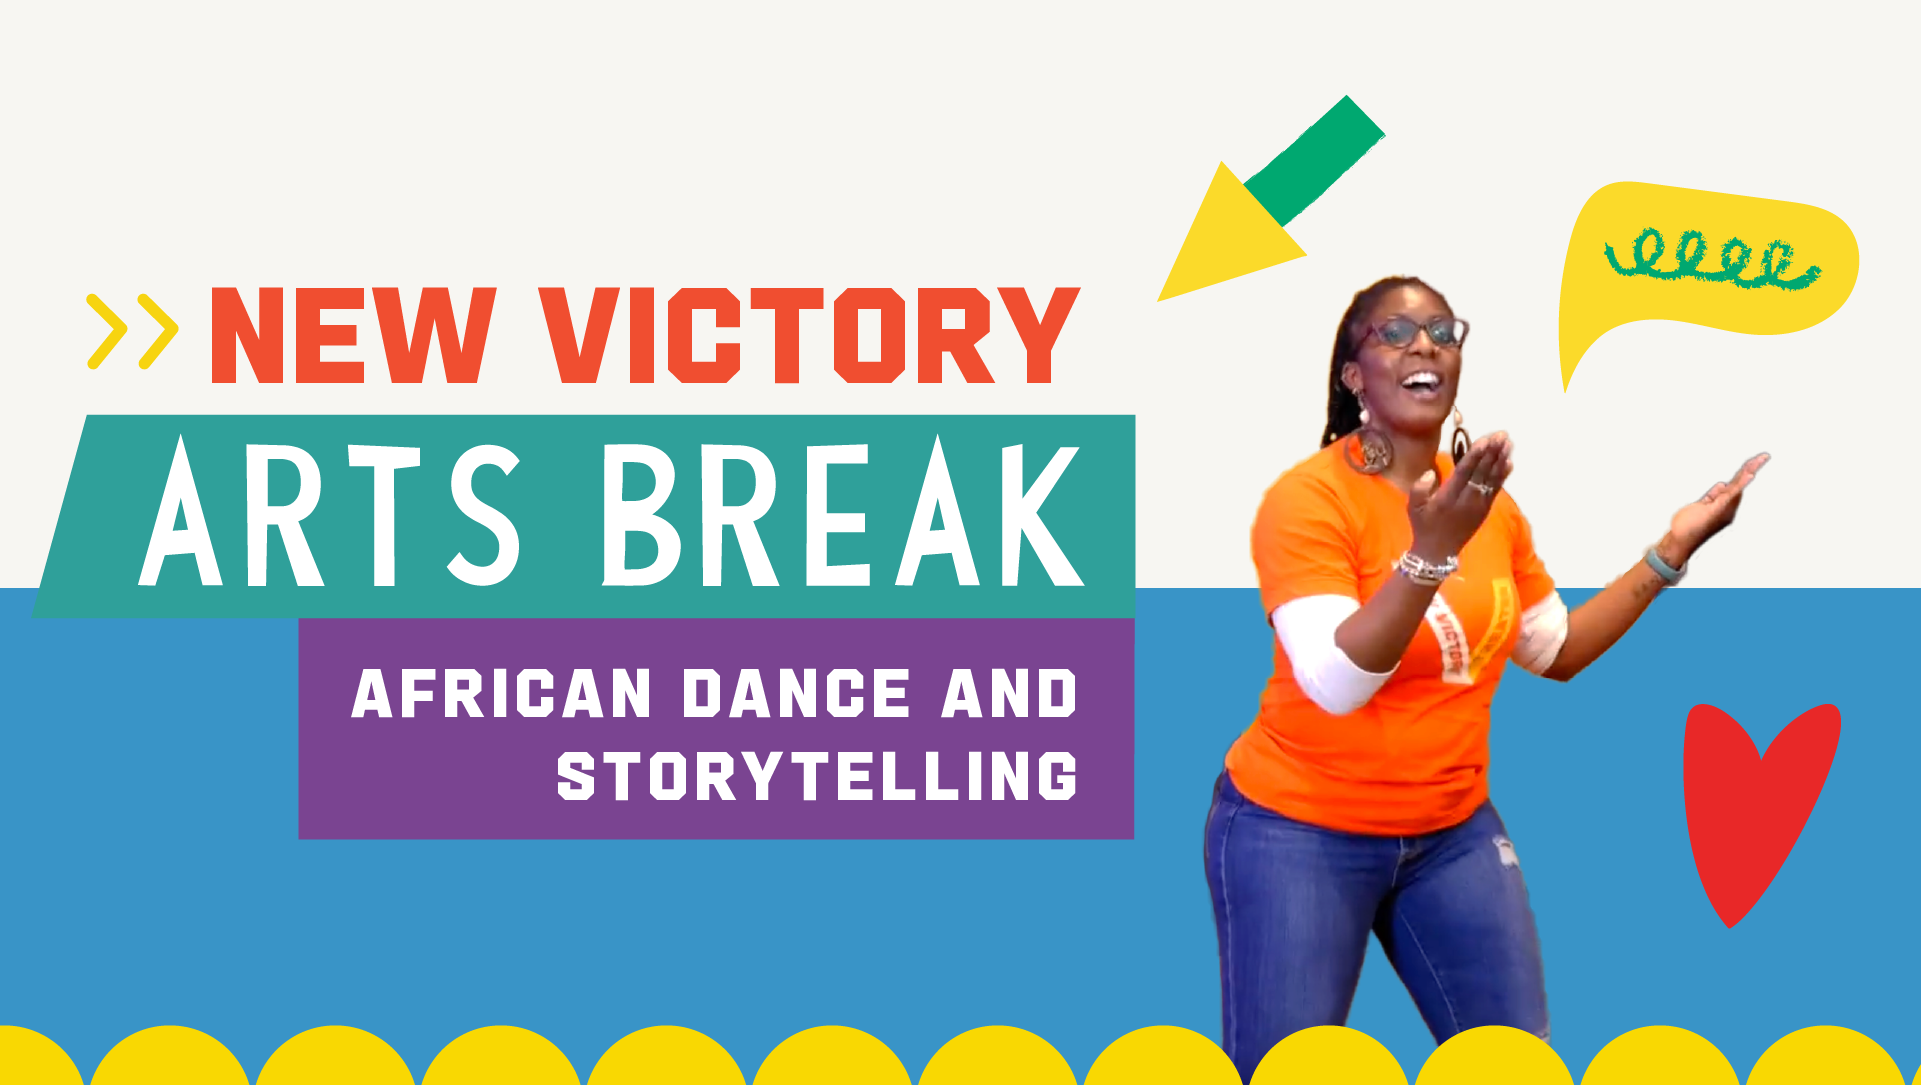 New Victory Arts Break: African Dance and Storytelling